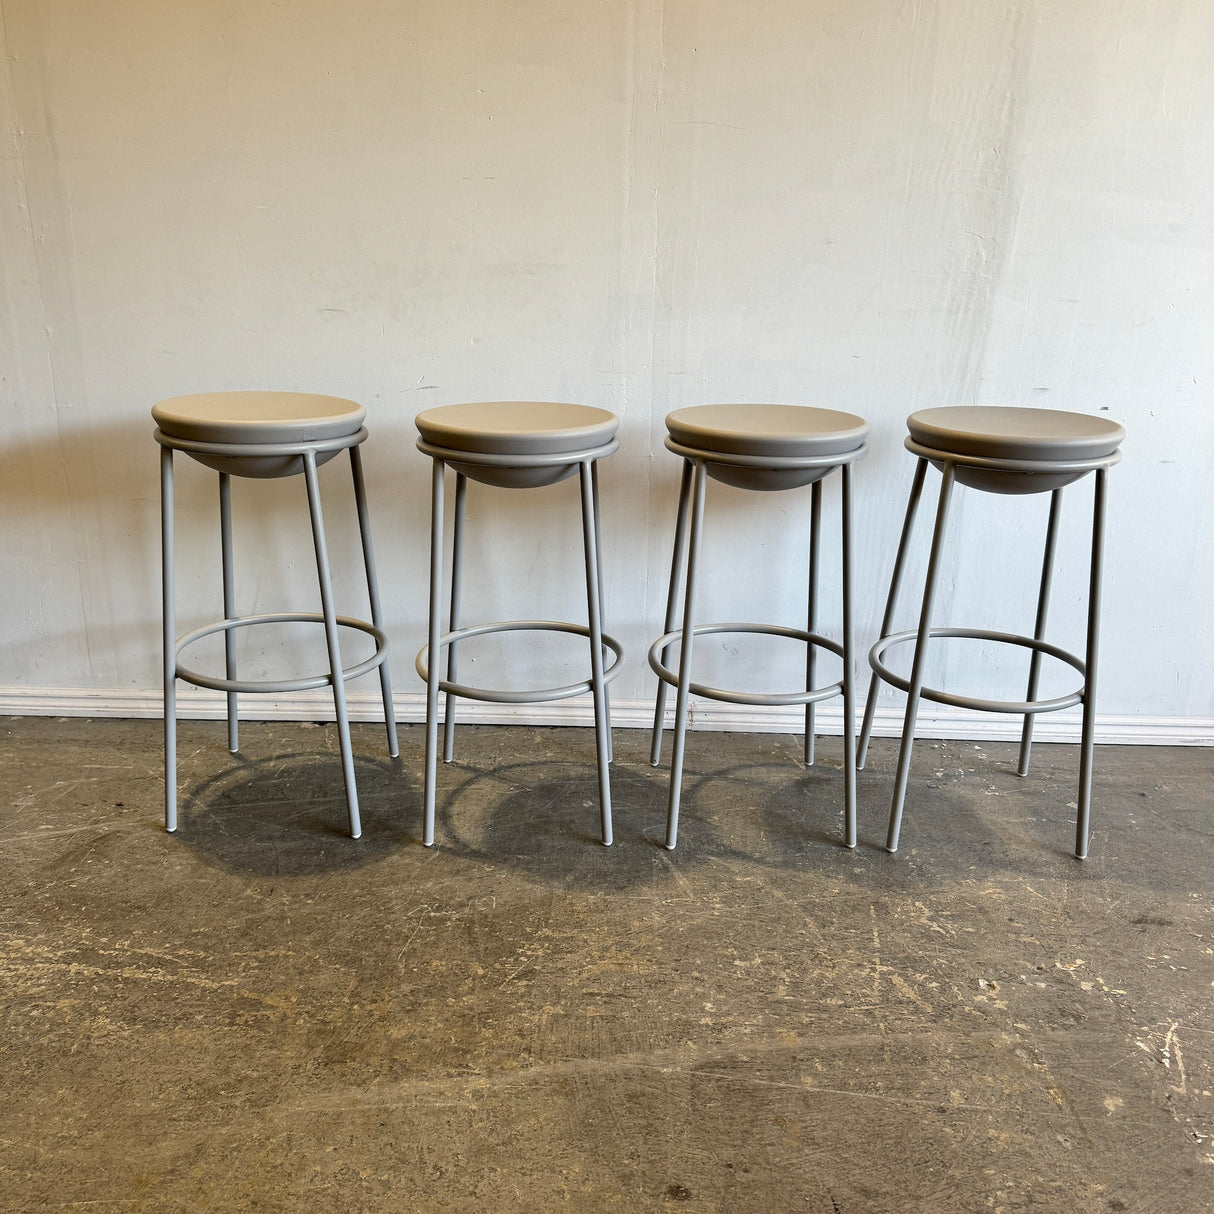 M.A.D. Furniture Roto Counter Stool